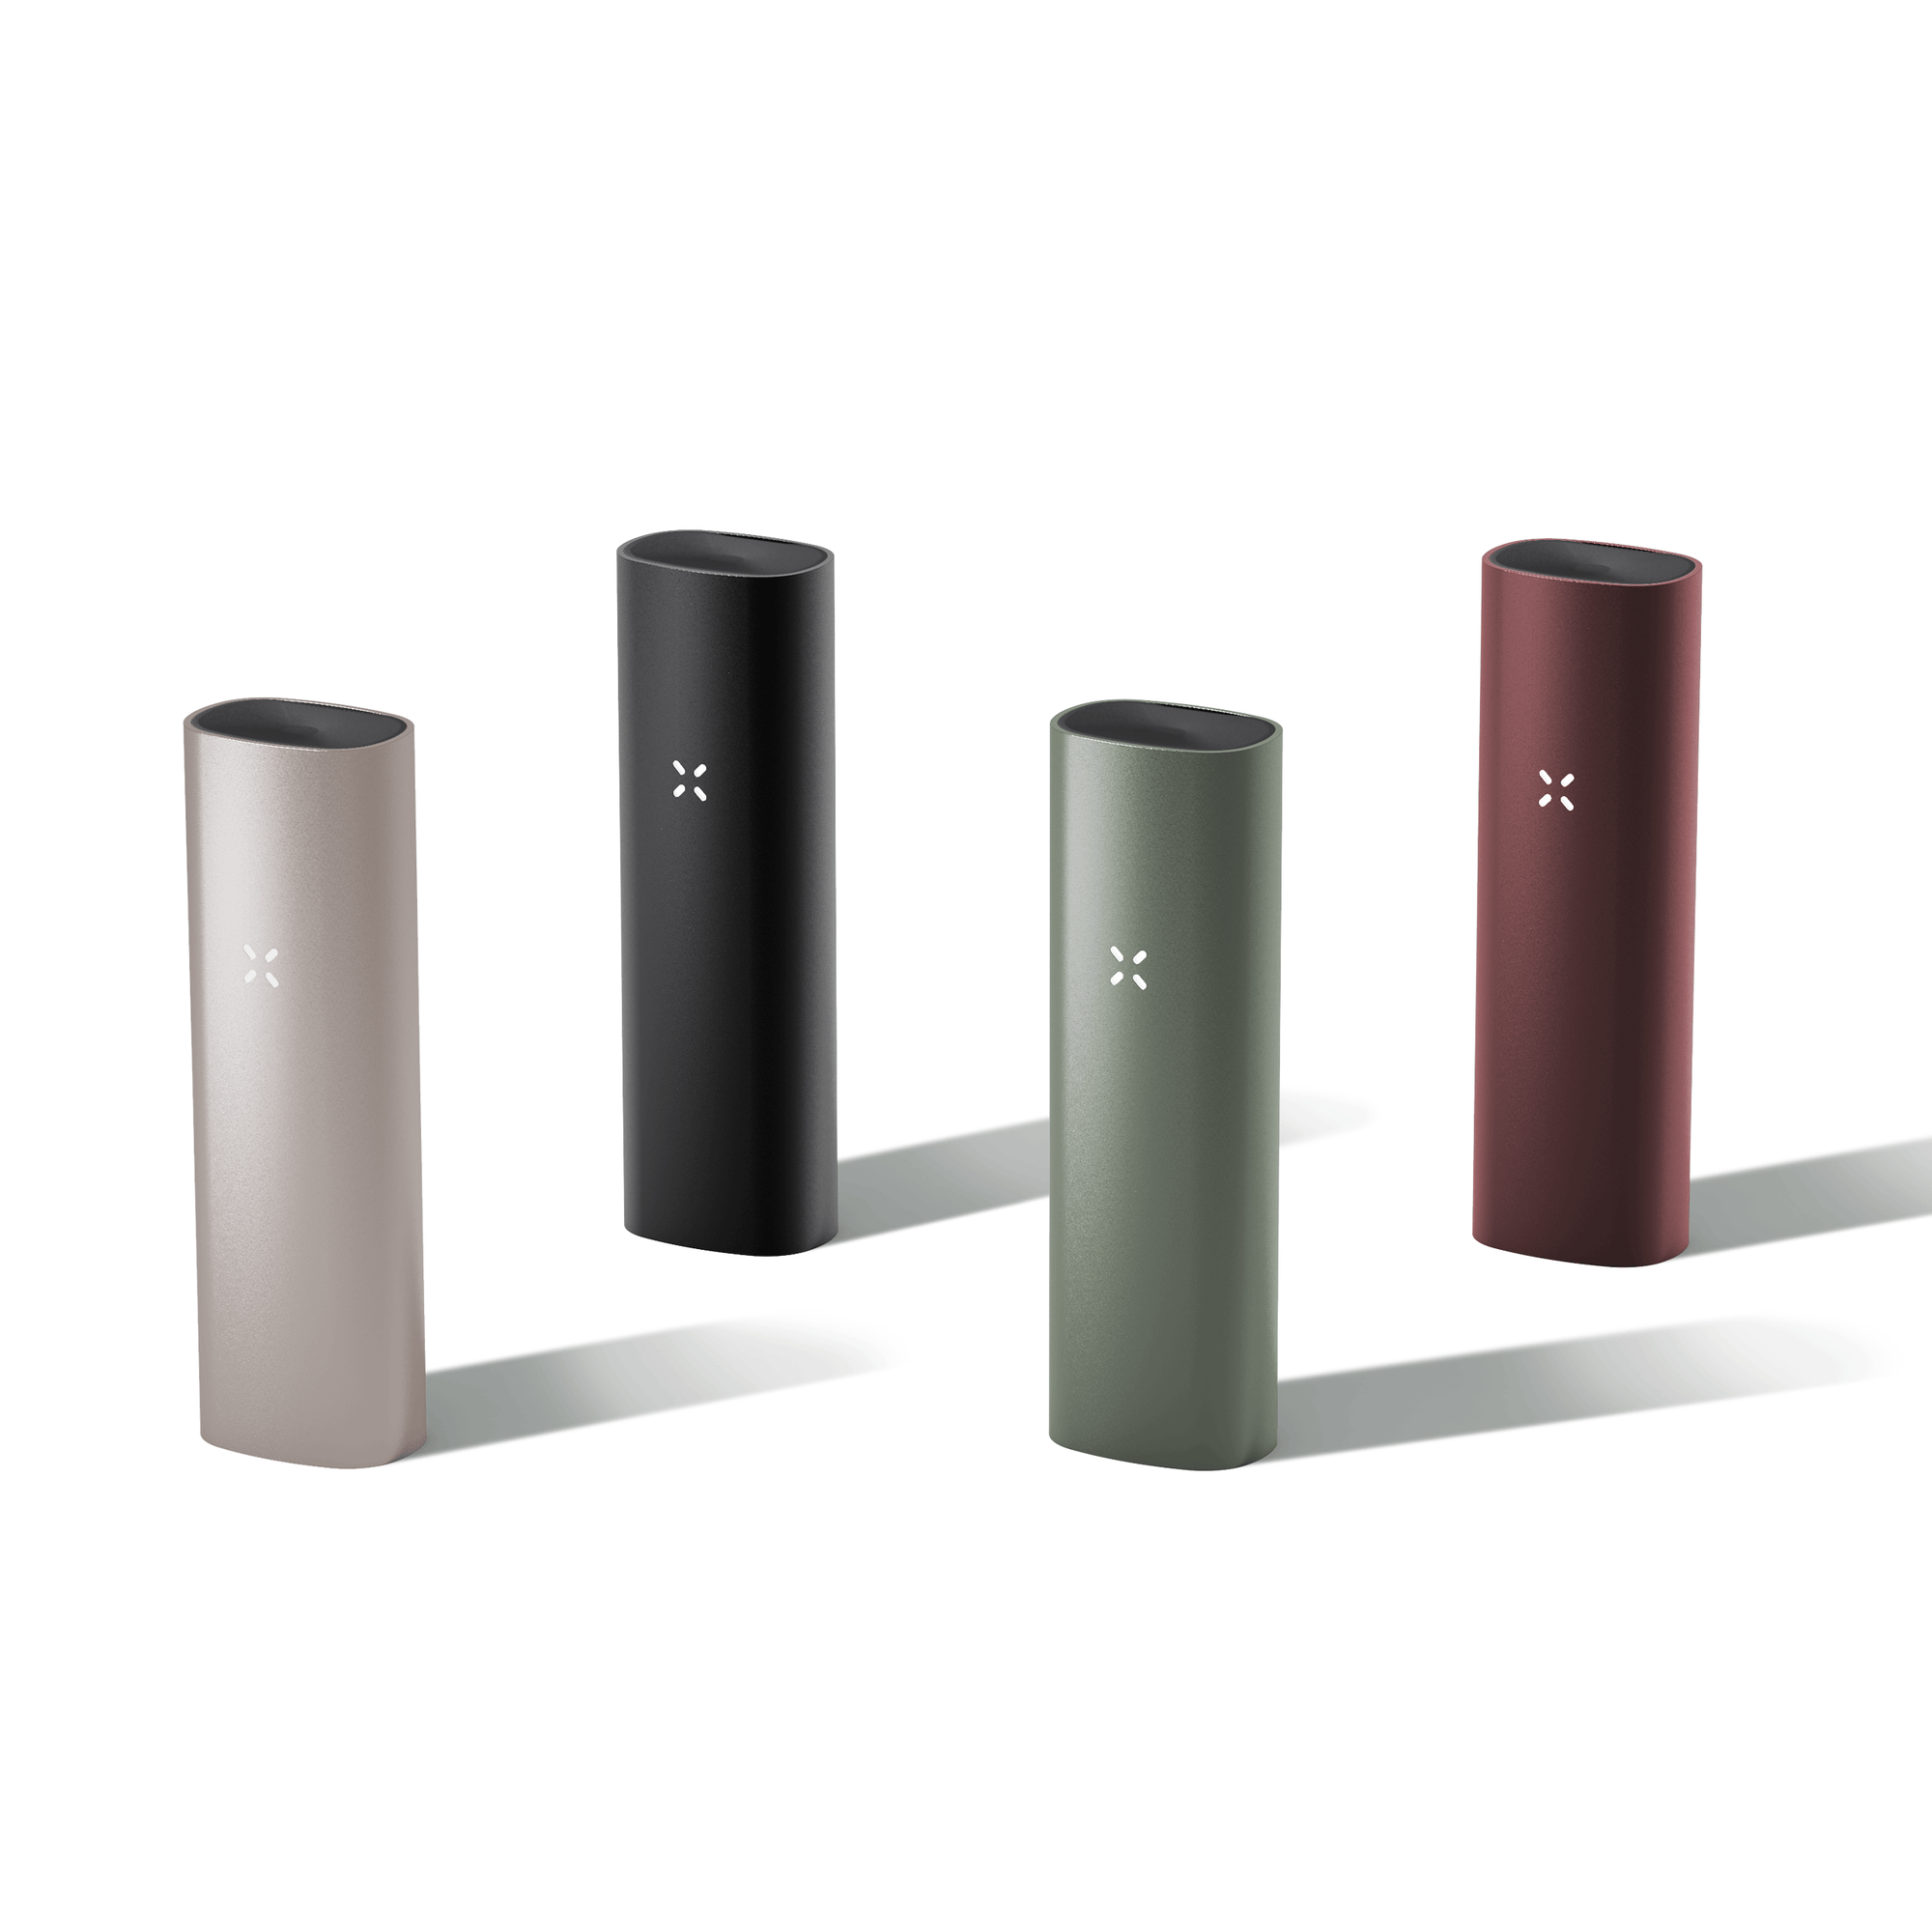 Incoming - the New Pax 3 Vapourisers now available in Cyprus!